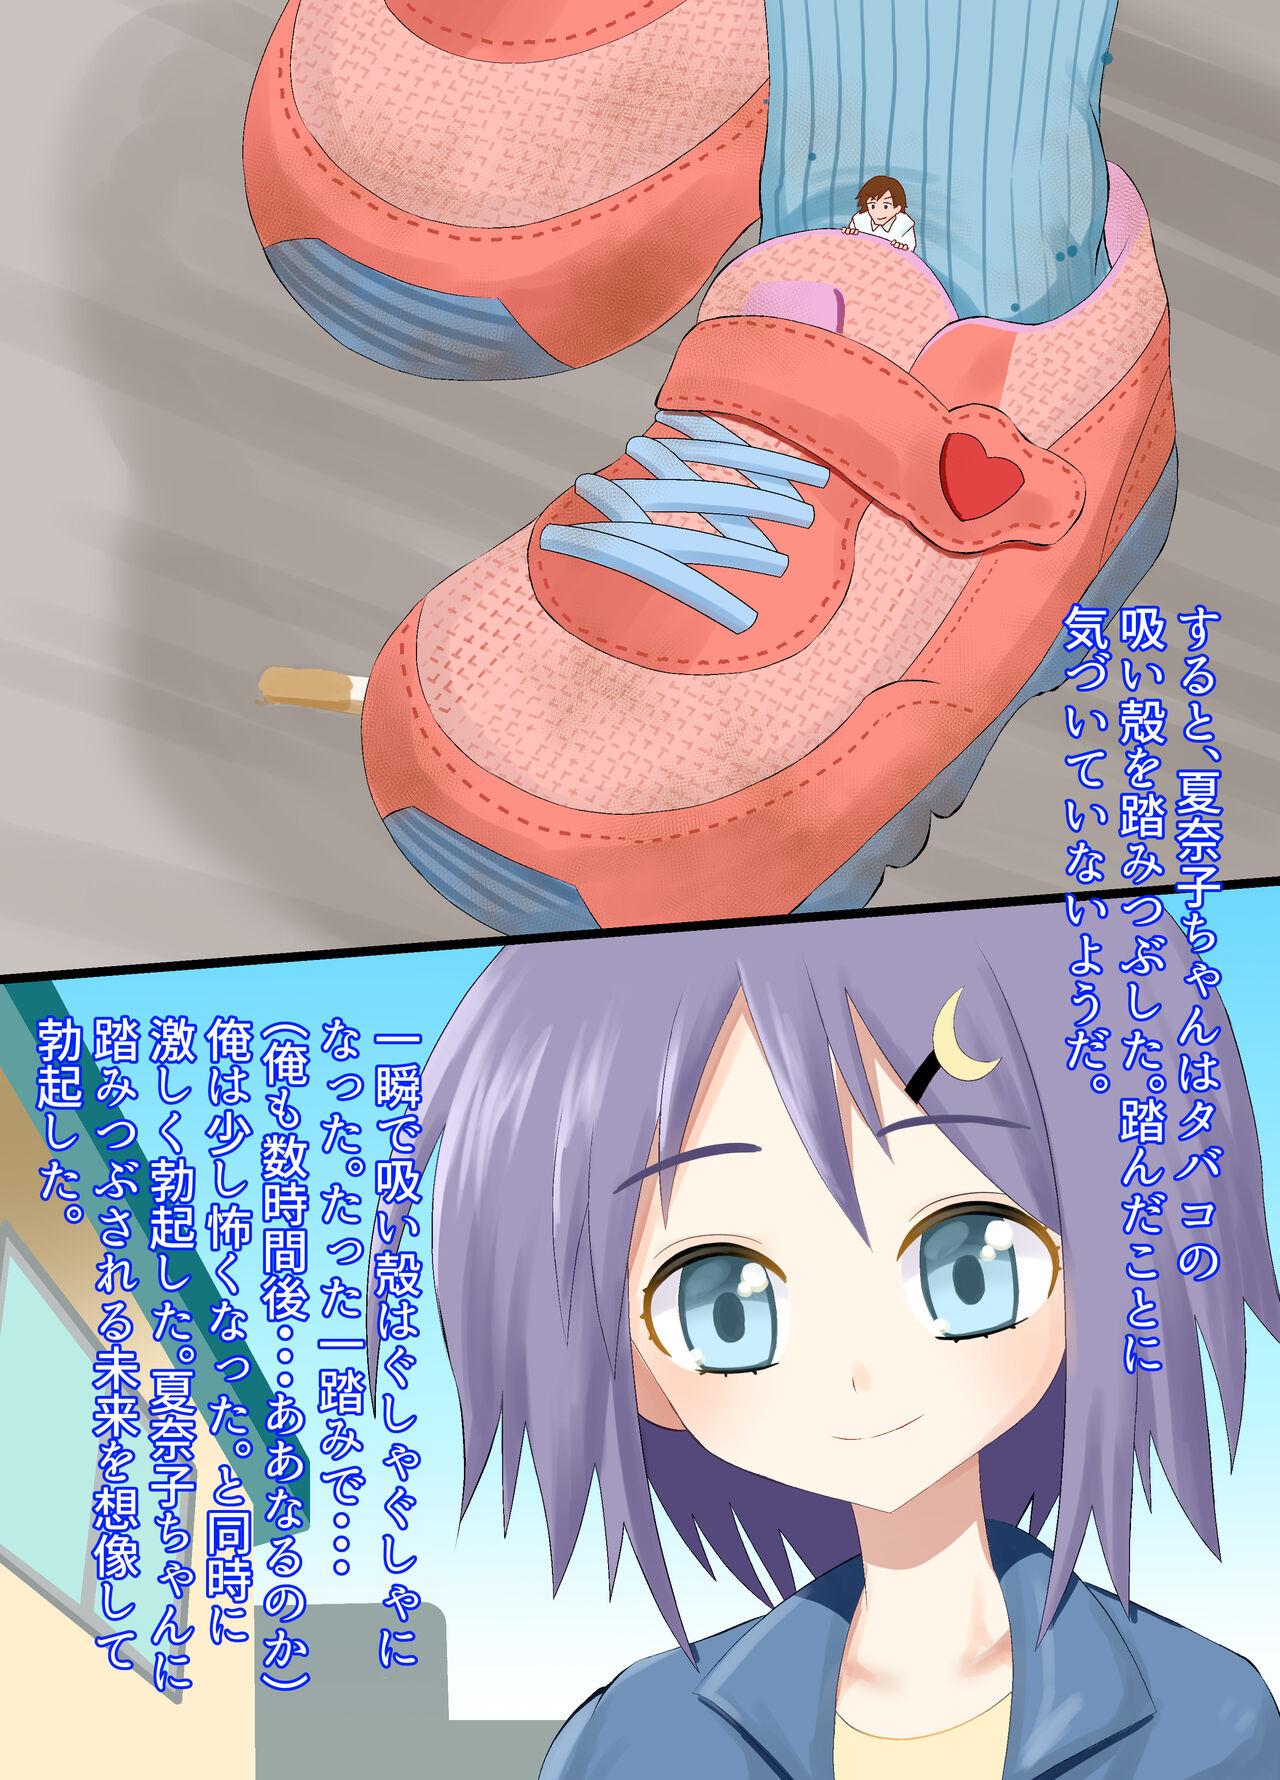 A CG collection of getting smaller and being stepped on by a girl 8